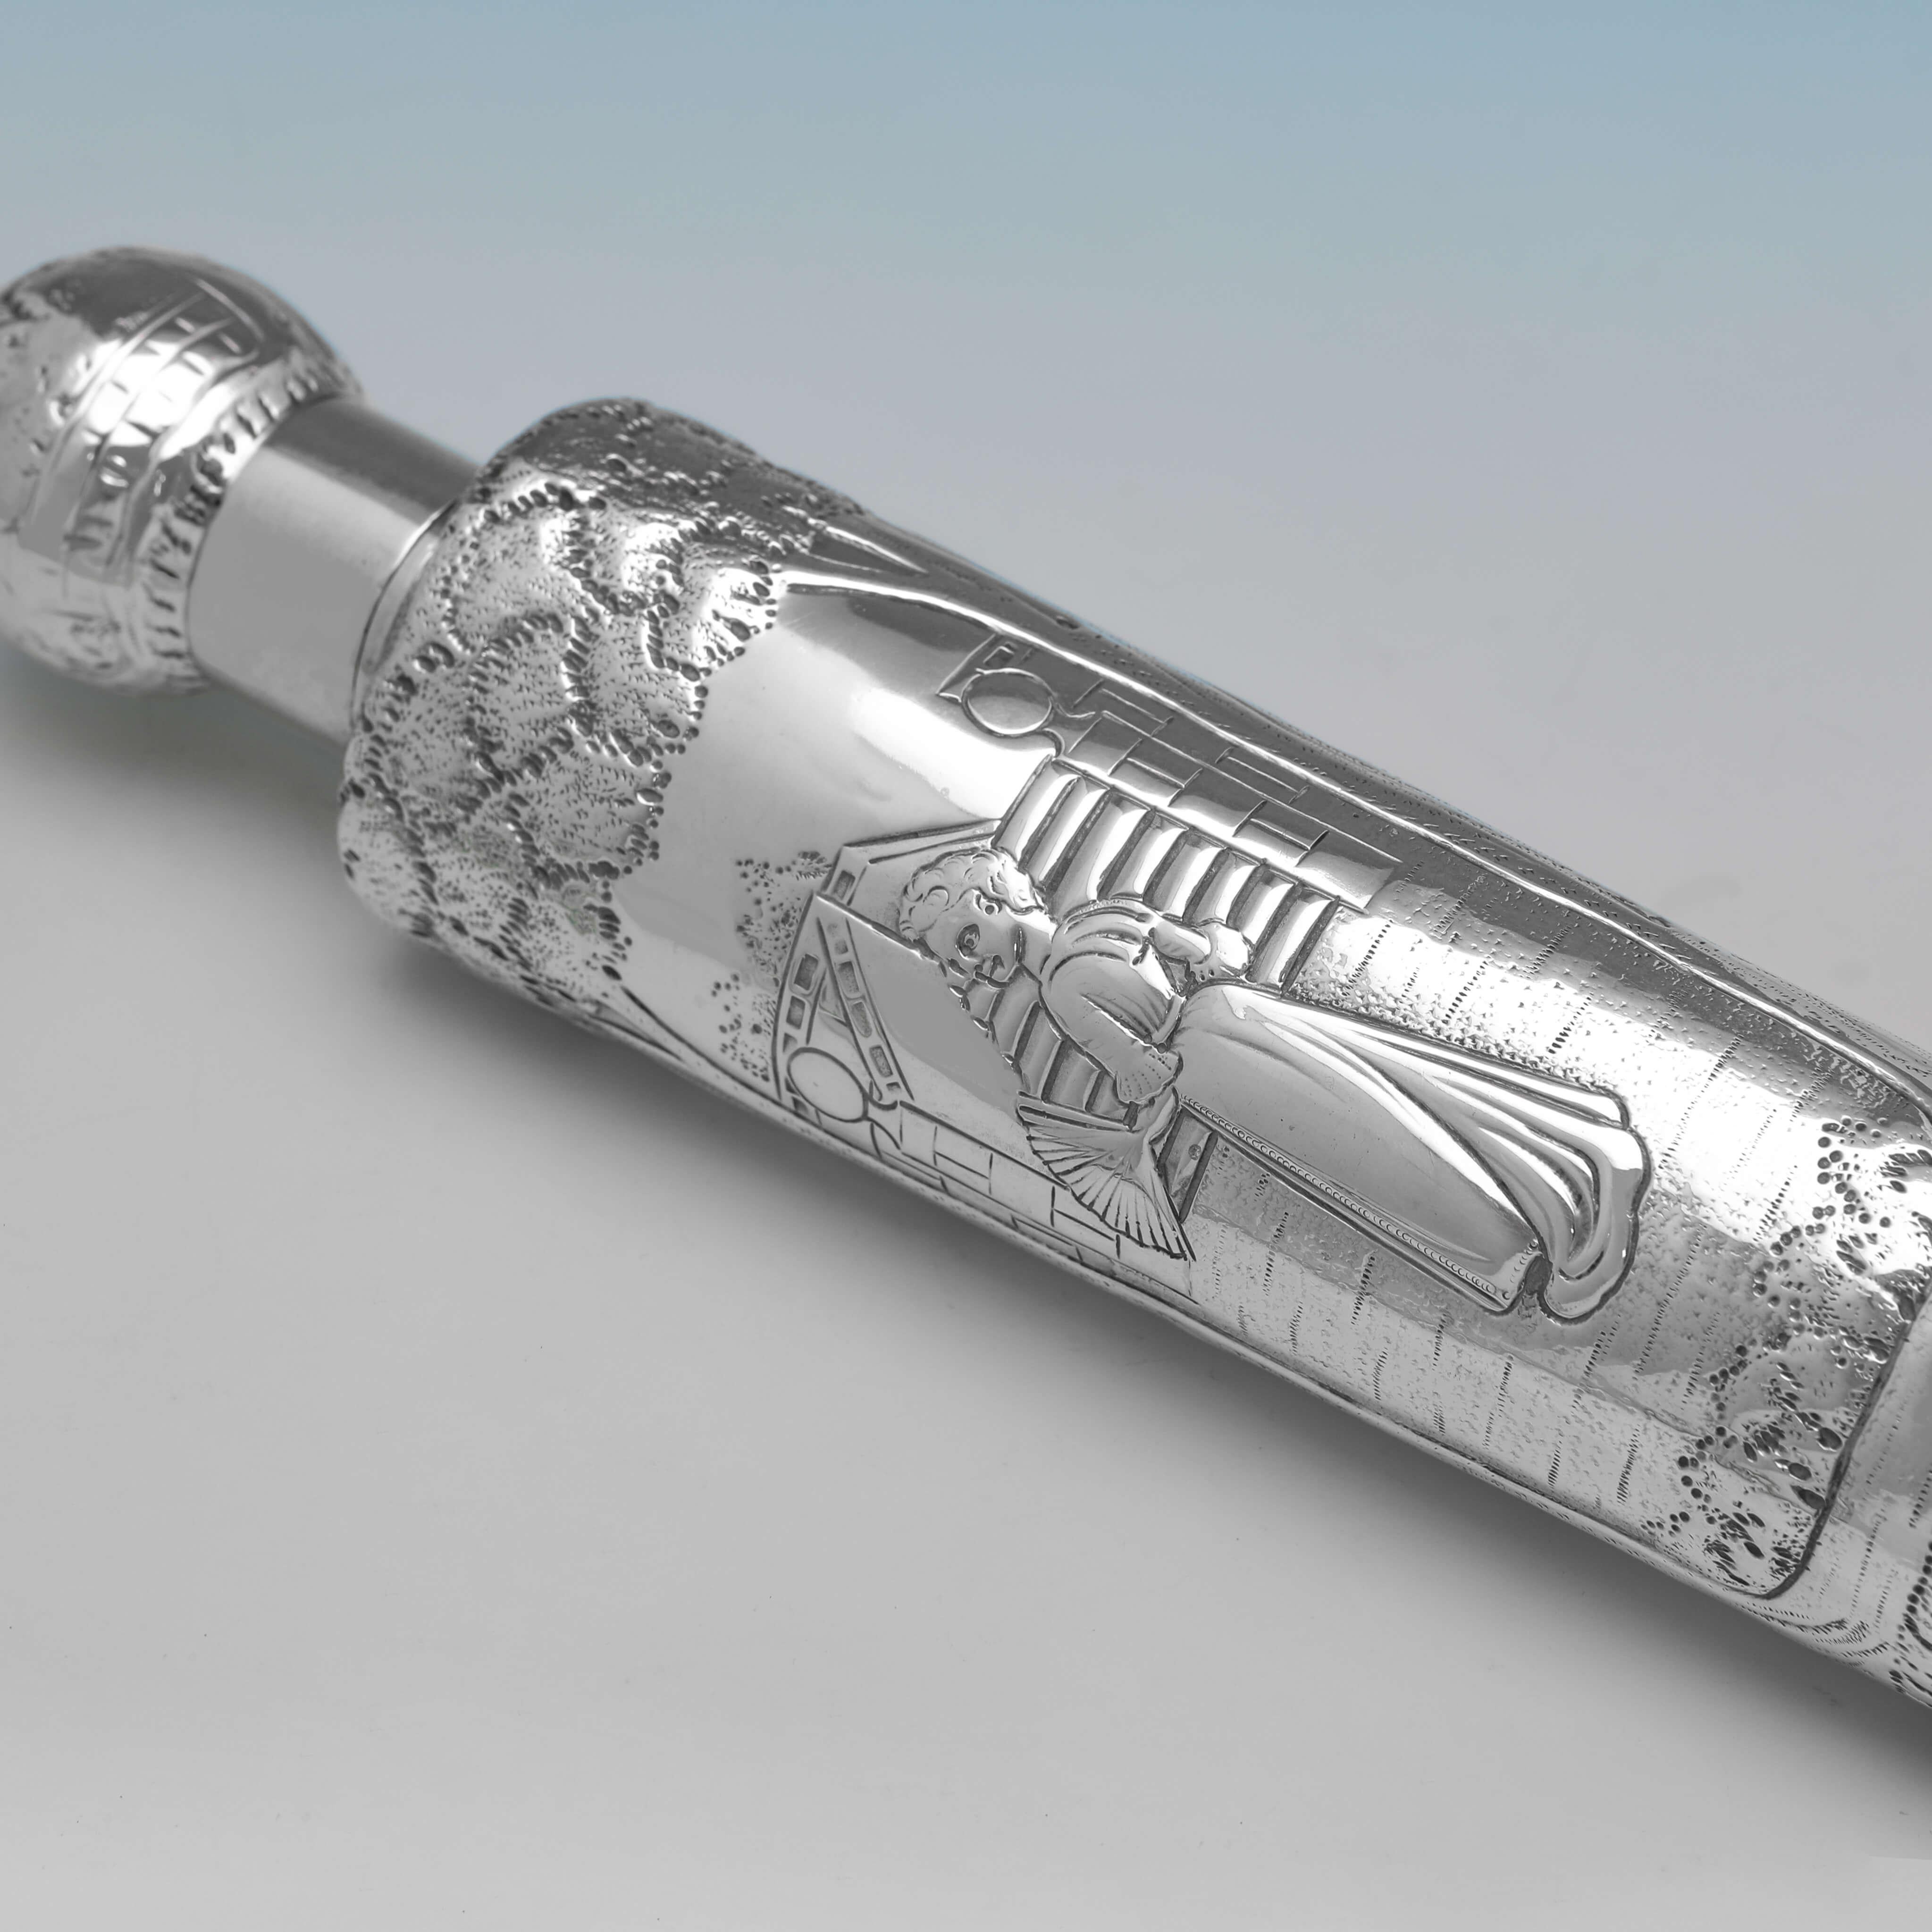 Hallmarked in London, 1896 by Samuel Jacob, this attractive, Victorian, Antique, Sterling Silver Scent Bottle, features wonderfully chased scenes throughout, and a removable lid. 

The scent bottle measures 15.5 inches (39.5cm) in length, and weighs